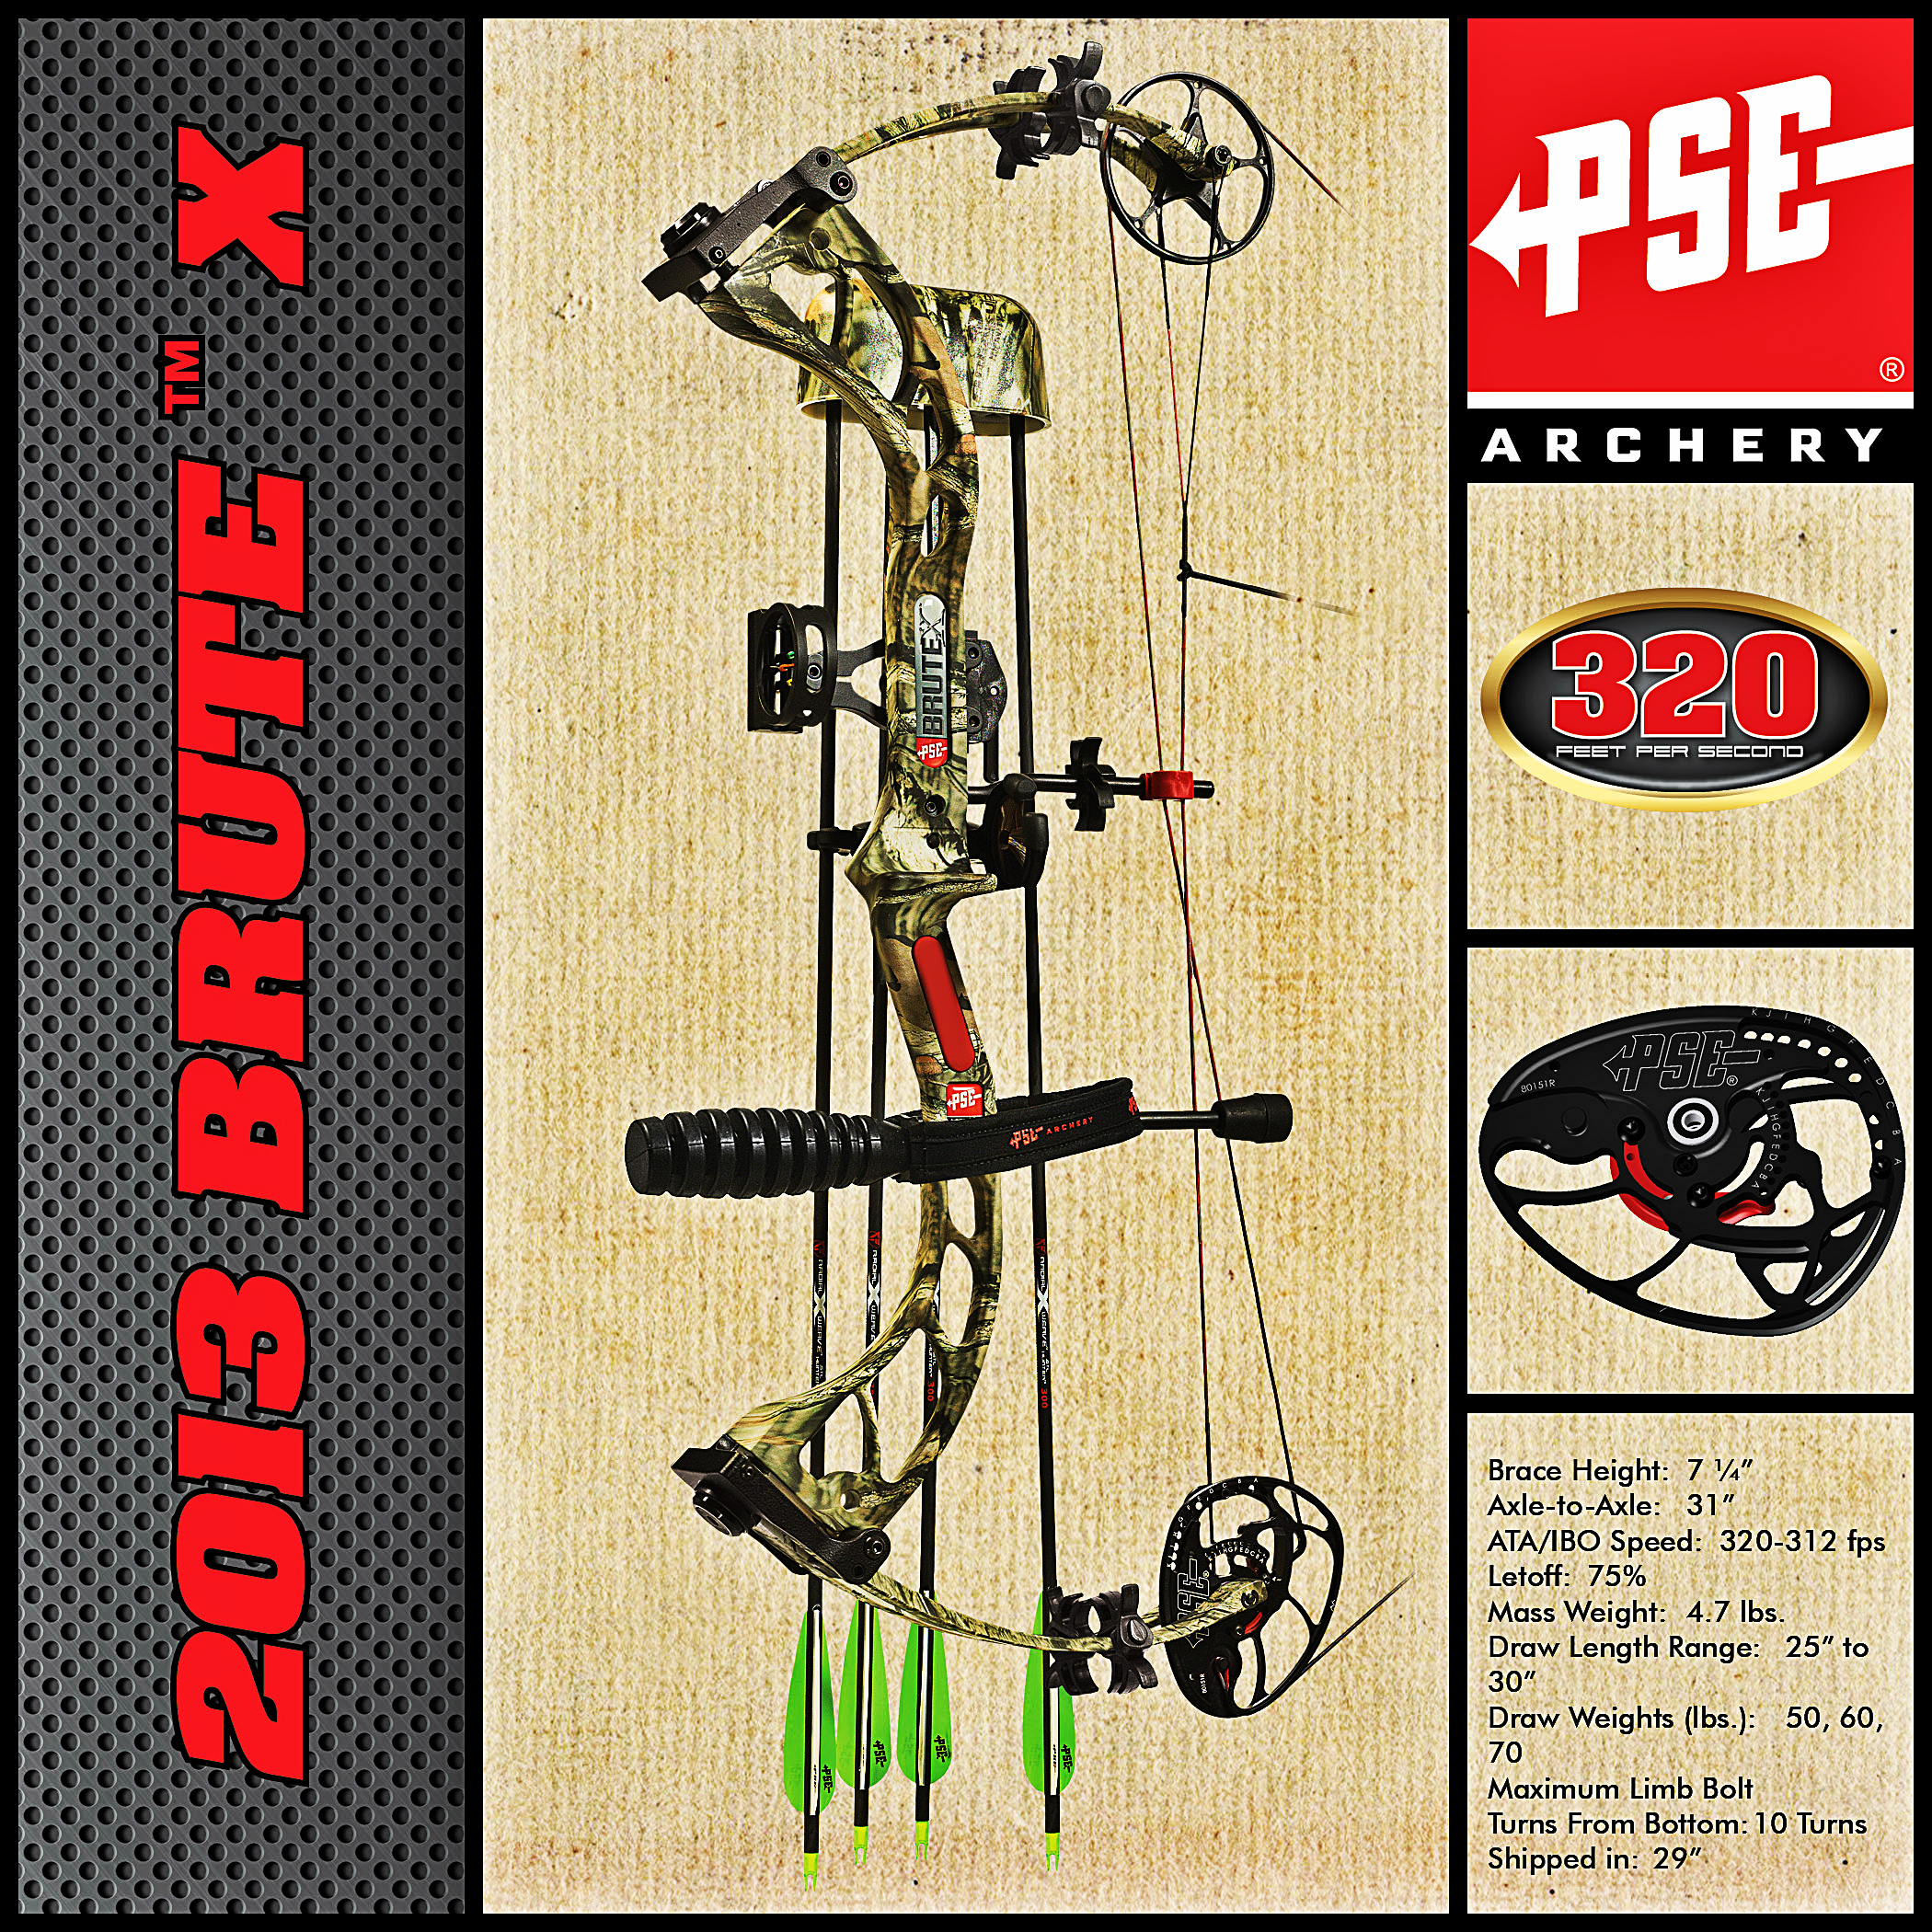 Enter to win a 2013 PSE X FORCE DREAM SEASON DNA